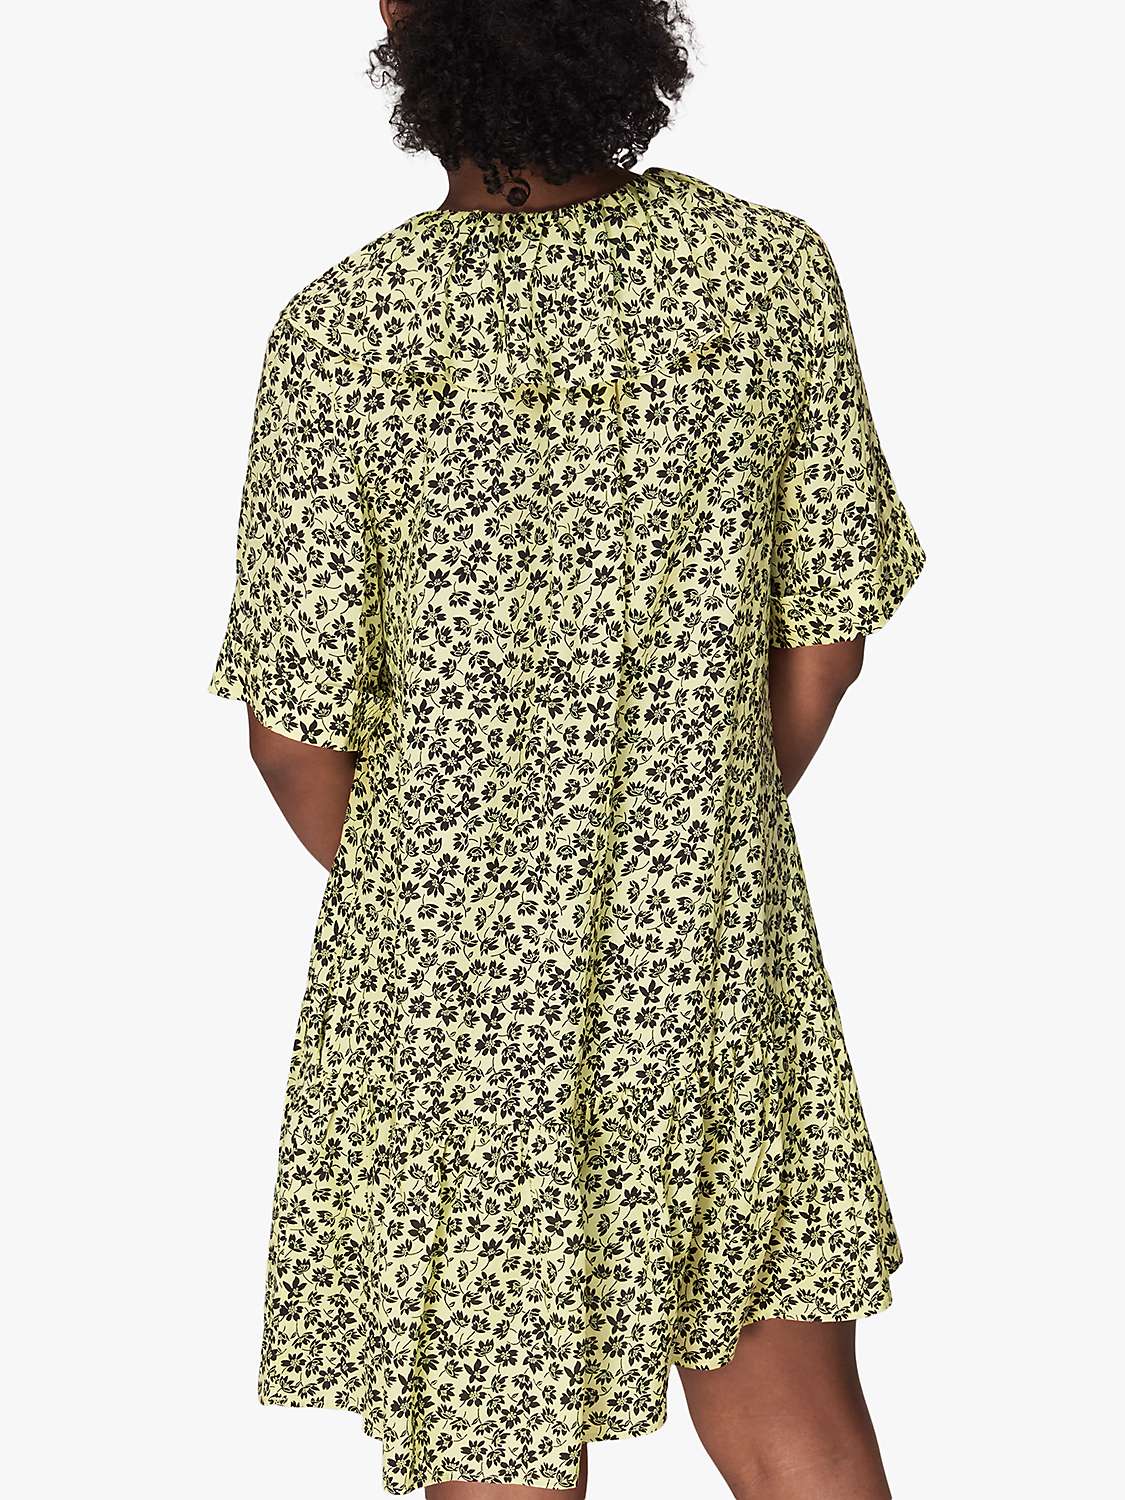 Buy Whistles Buttercup Floral Print Dress, Yellow/Multi Online at johnlewis.com